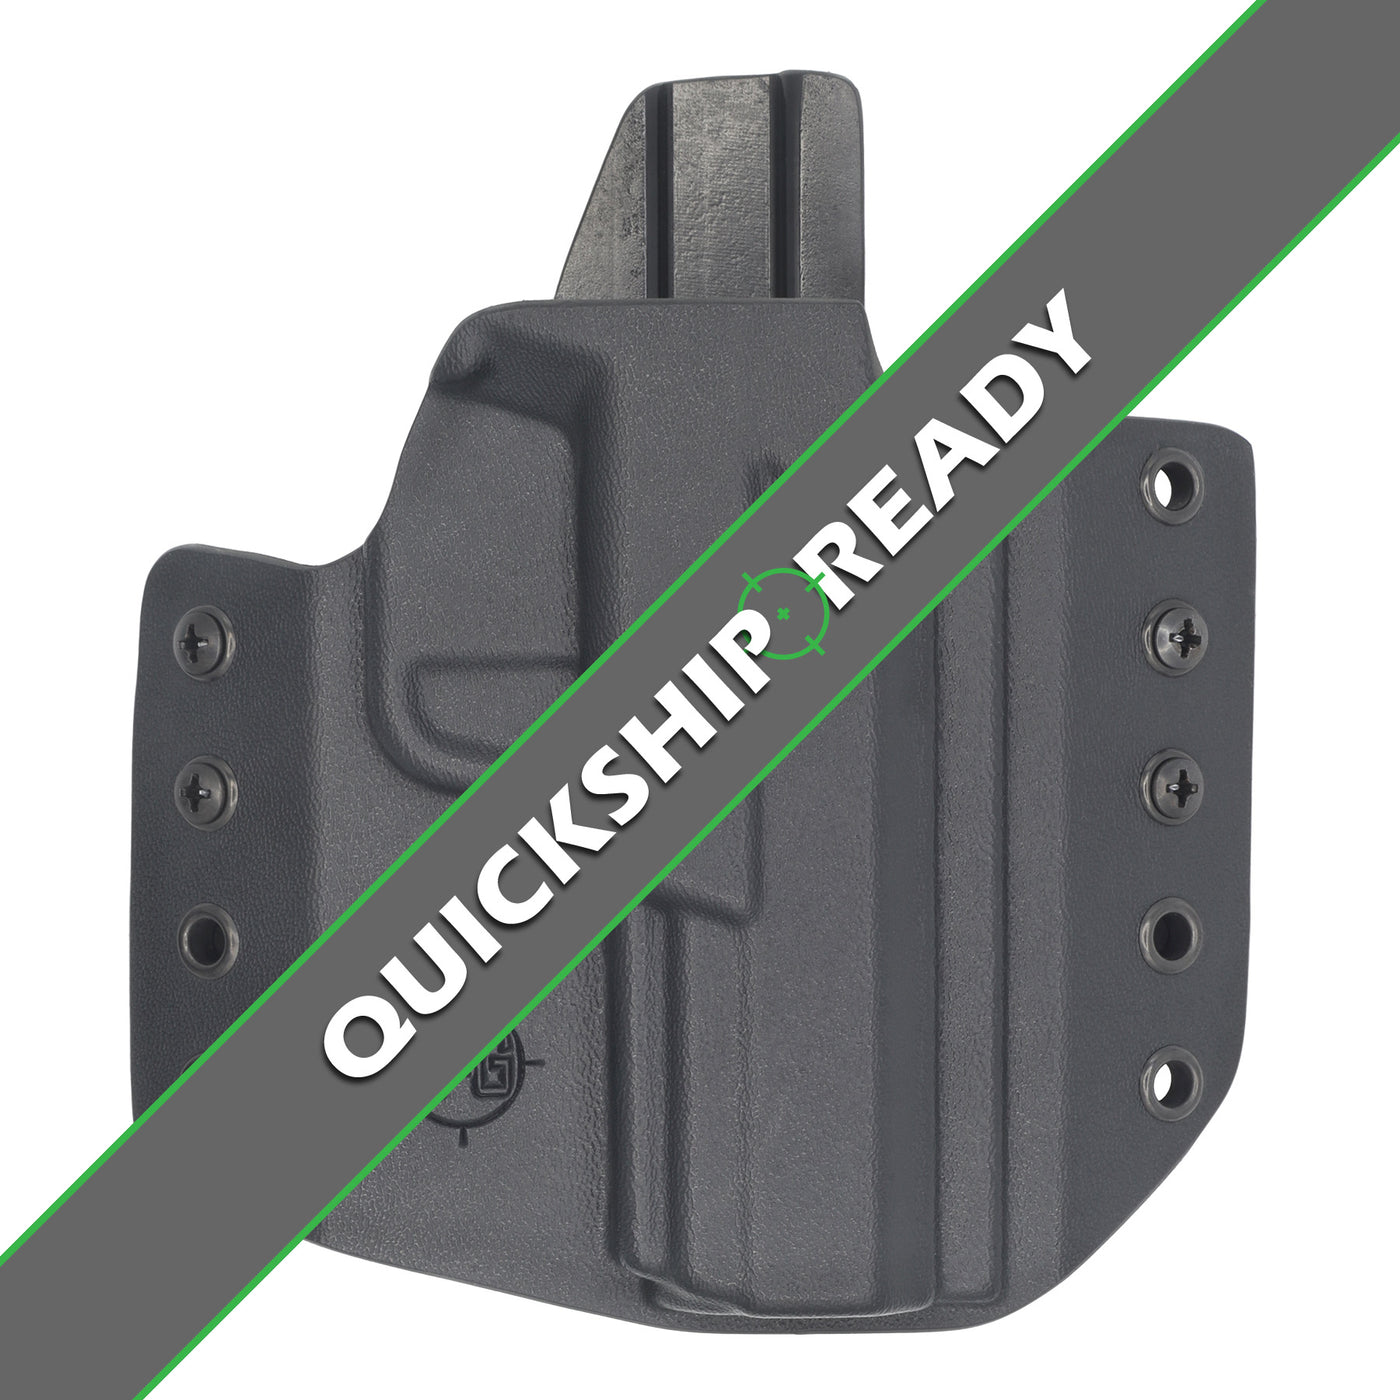 C&G Holsters quickship OWB inside the waistband Holster for the Ruger Security 9